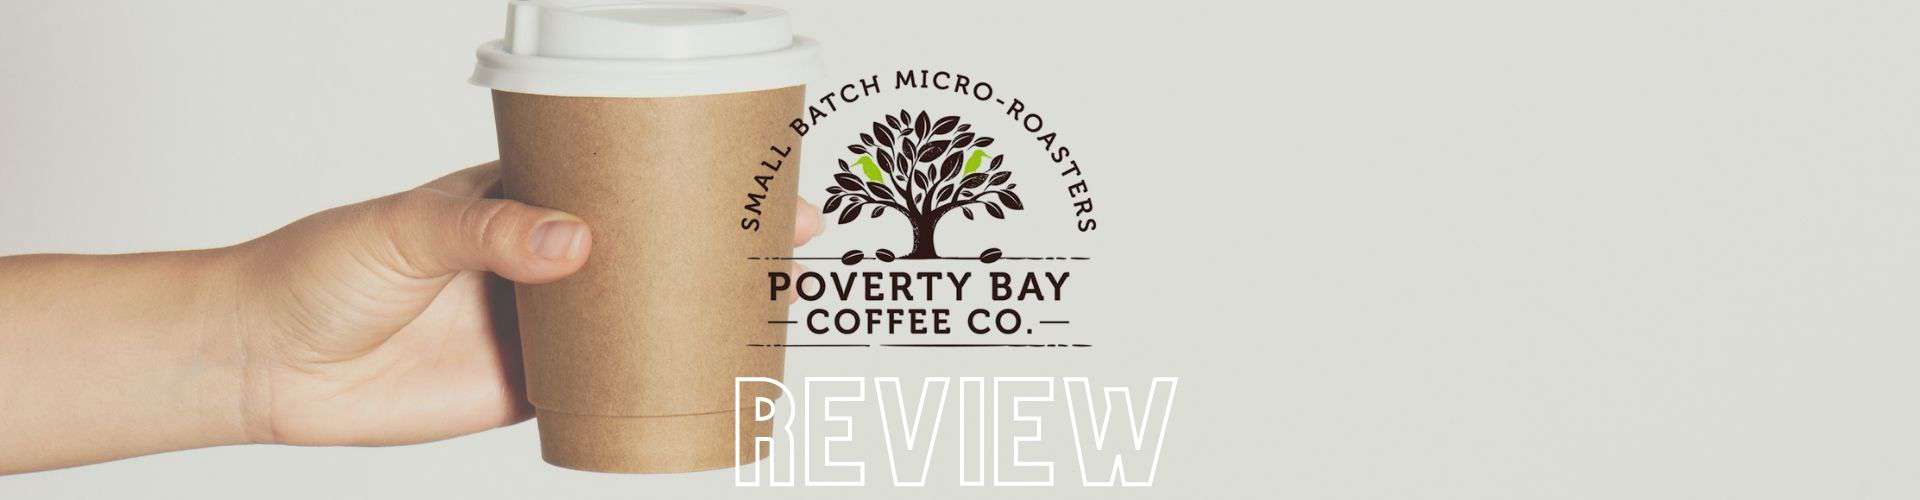 Poverty Bay Coffee: 23 Years of Brewing Eco-Conscious Coffee and Beyond